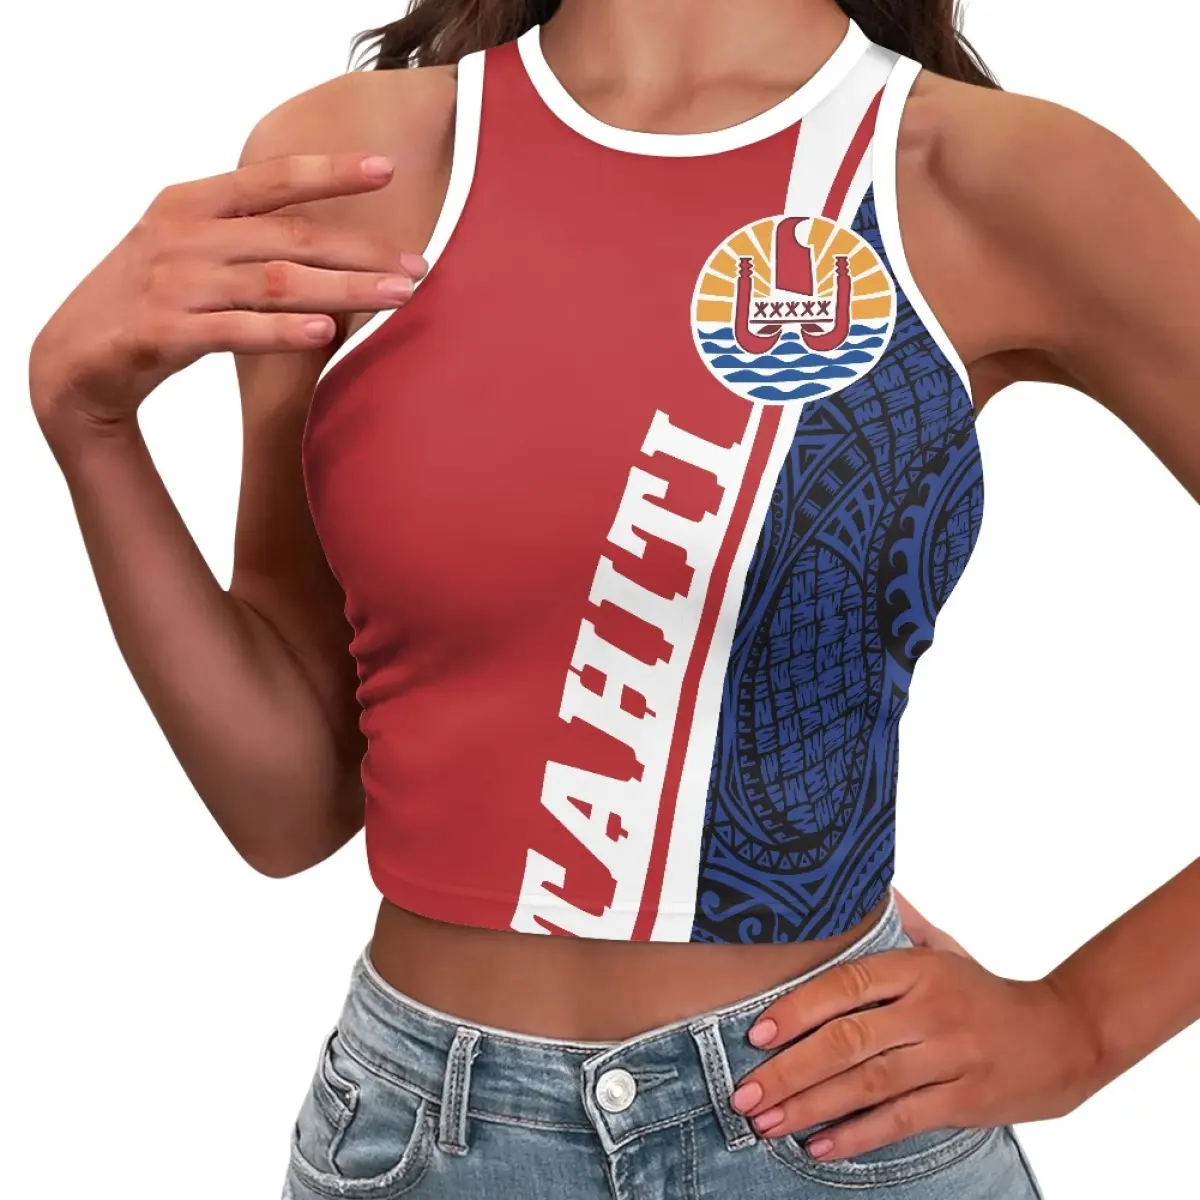 Personalized Tahiti Design Tight Midriff Vest For Women Full Customized Ladies Sleeveless Crop Tops T Shirt OEM Manufacture